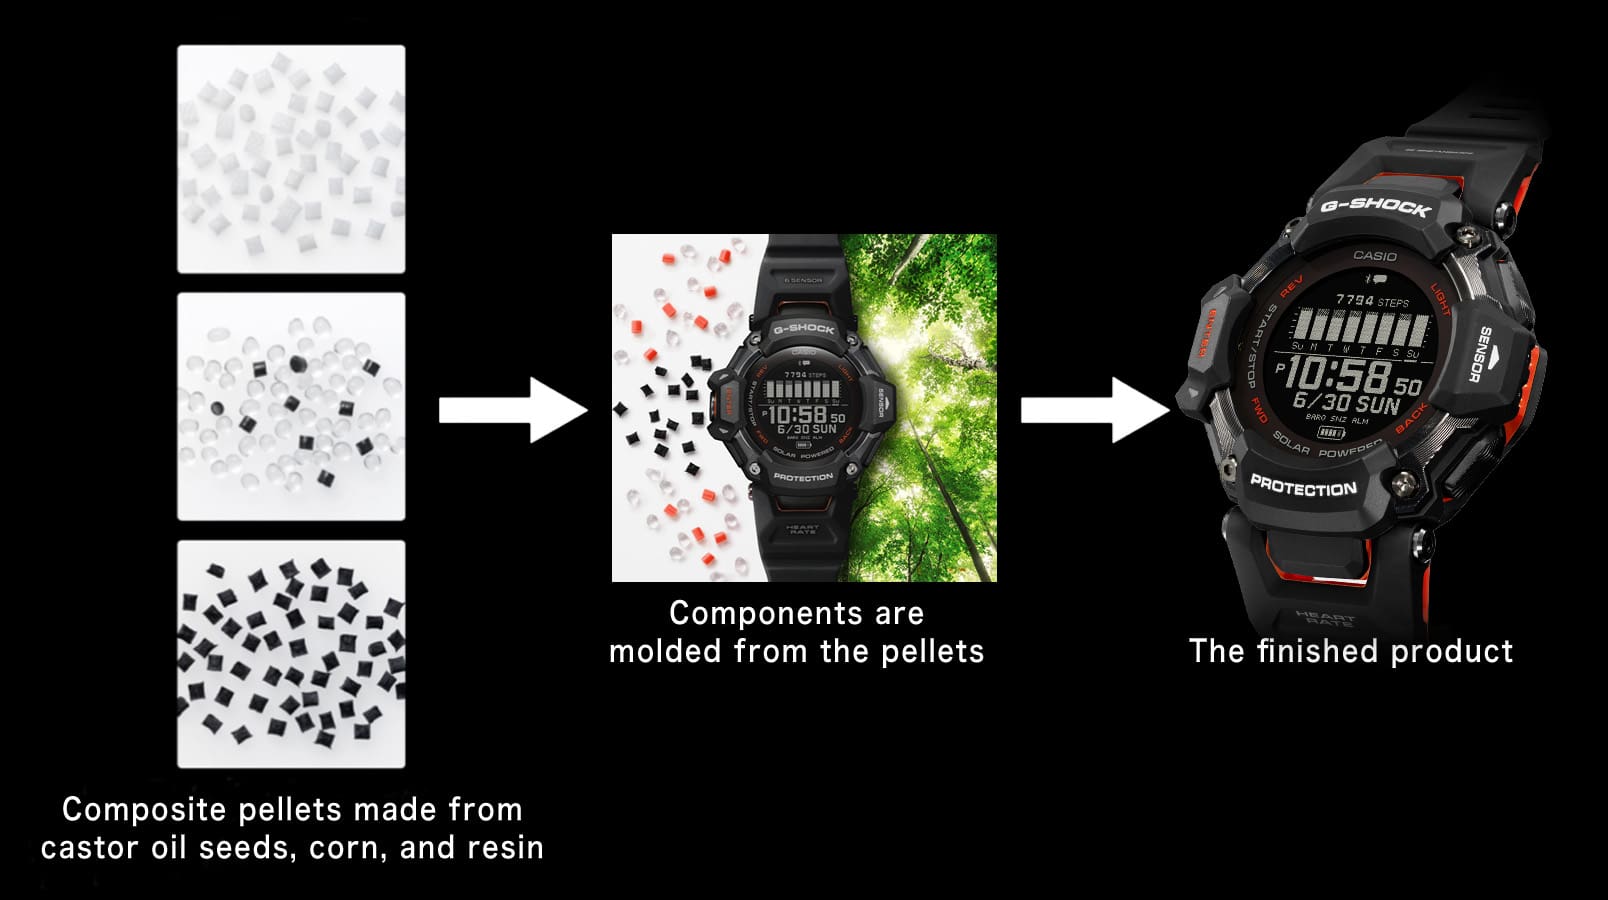 Infographic of composite pellets made from castor oil seeds, corn, and resin then molded from the pellets to make the finished watch